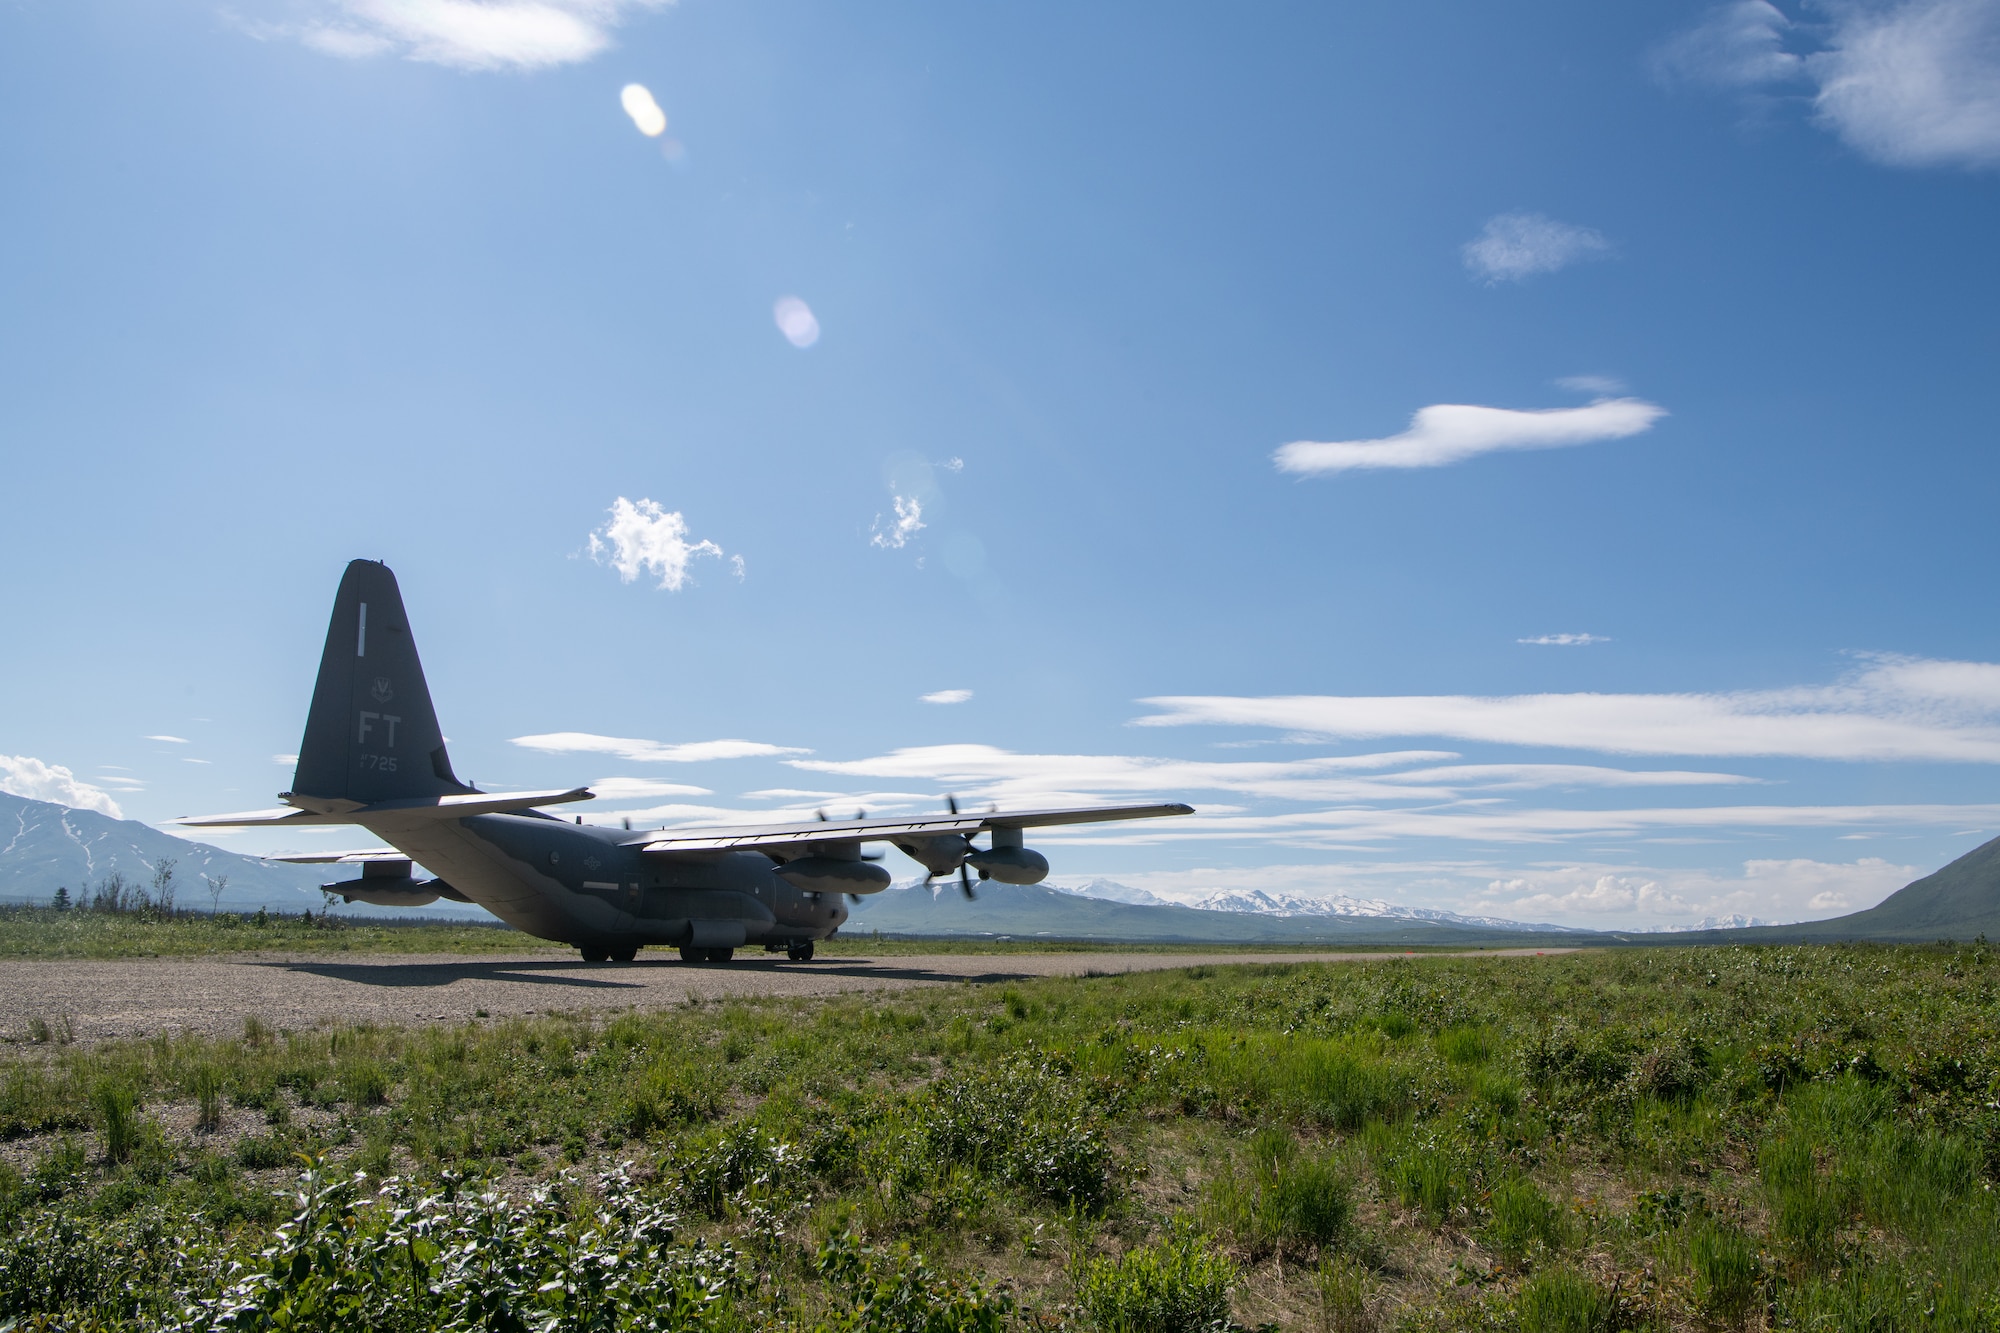 A C-130 sits at the end of a dirt strip runway.